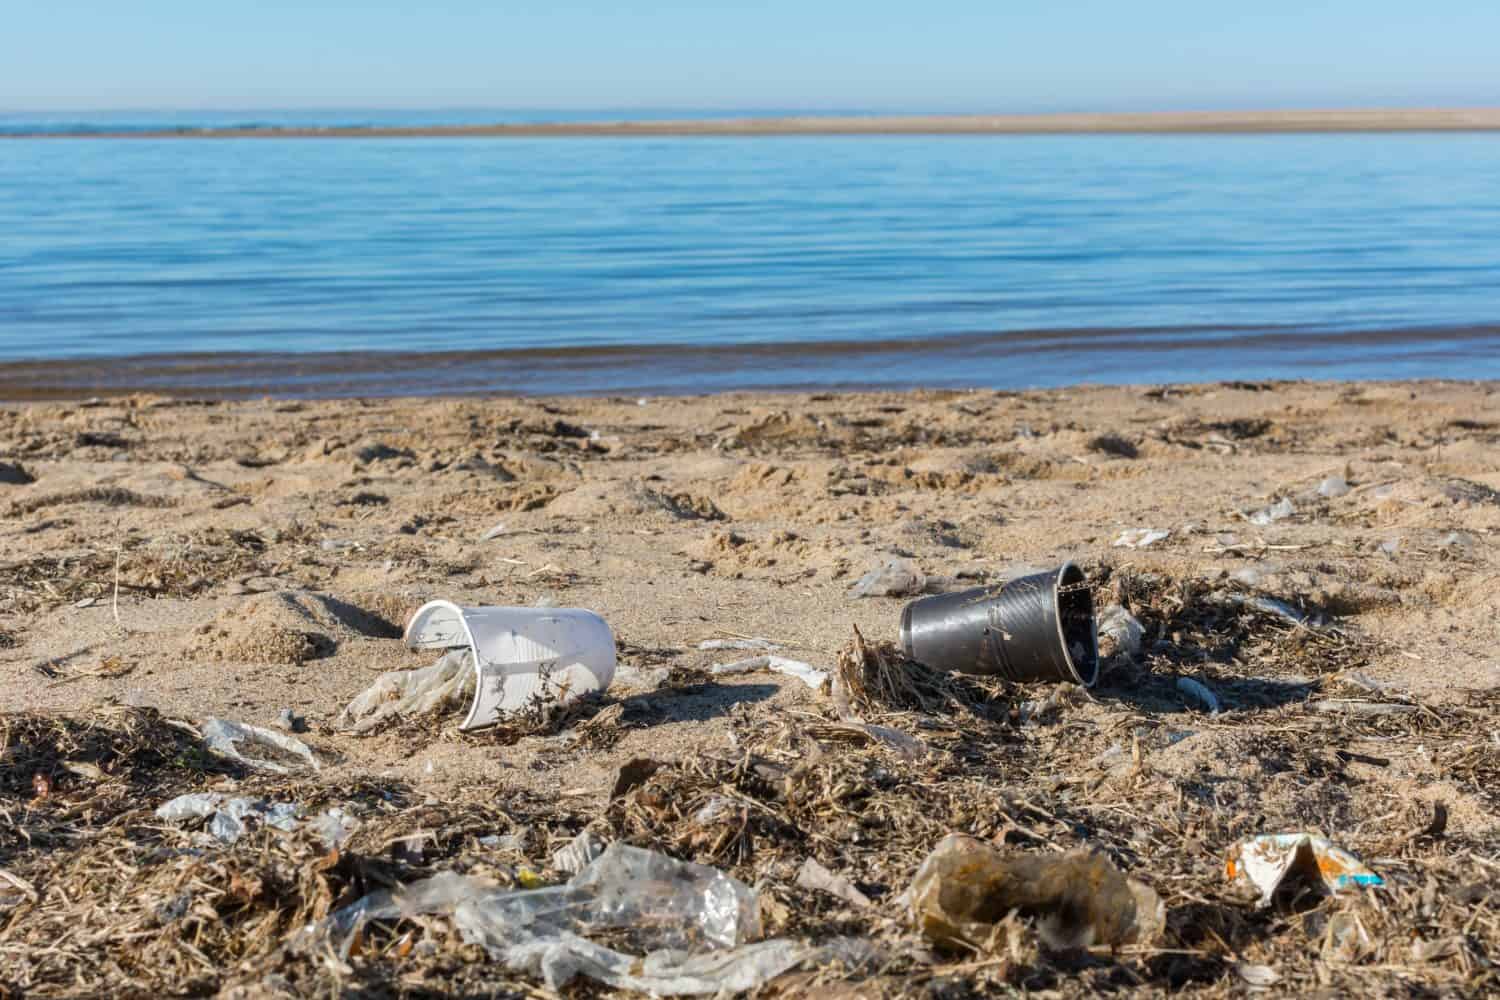 Plastic cups and other debris washed ashore, polluting Baltic sea coast beach